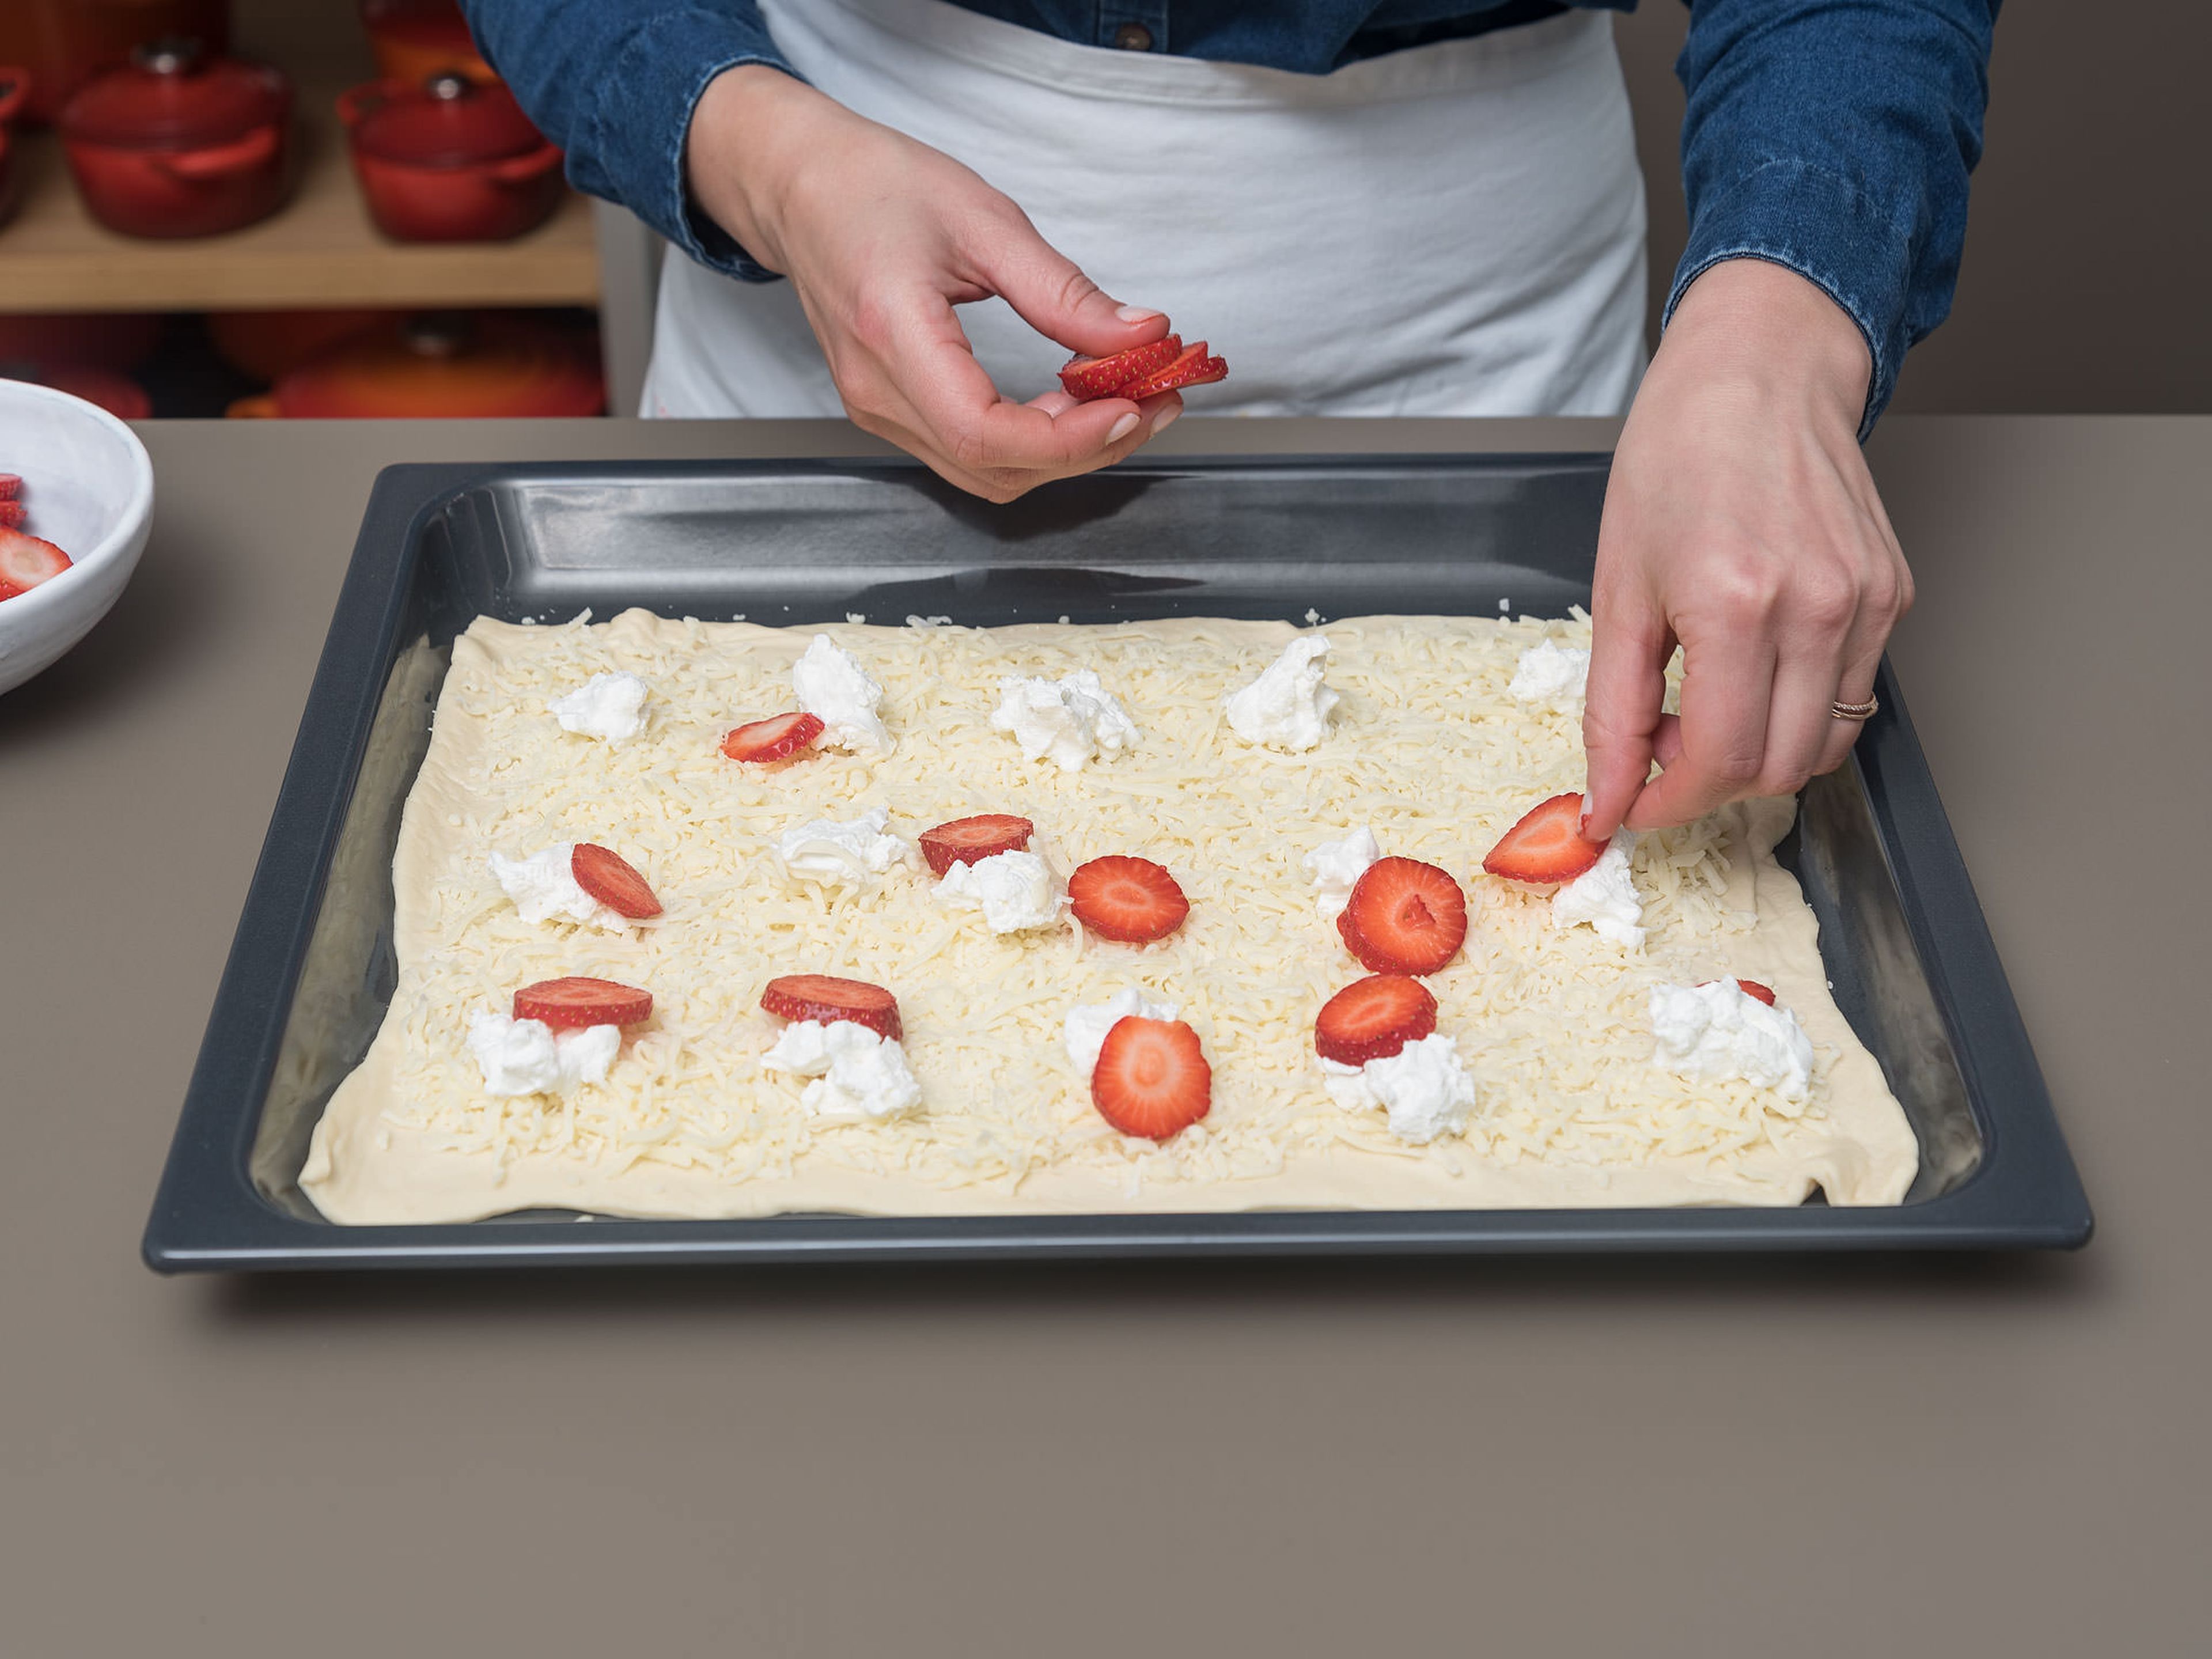 Roll pizza dough out onto a parchment-lined baking sheet. Top with shredded mozzarella, large crumbles of goat cheese, and strawberry rounds. Bake at 190°C/375°F for approx. 20 – 30 min., or until the cheese is bubbling and the crust is golden-brown.